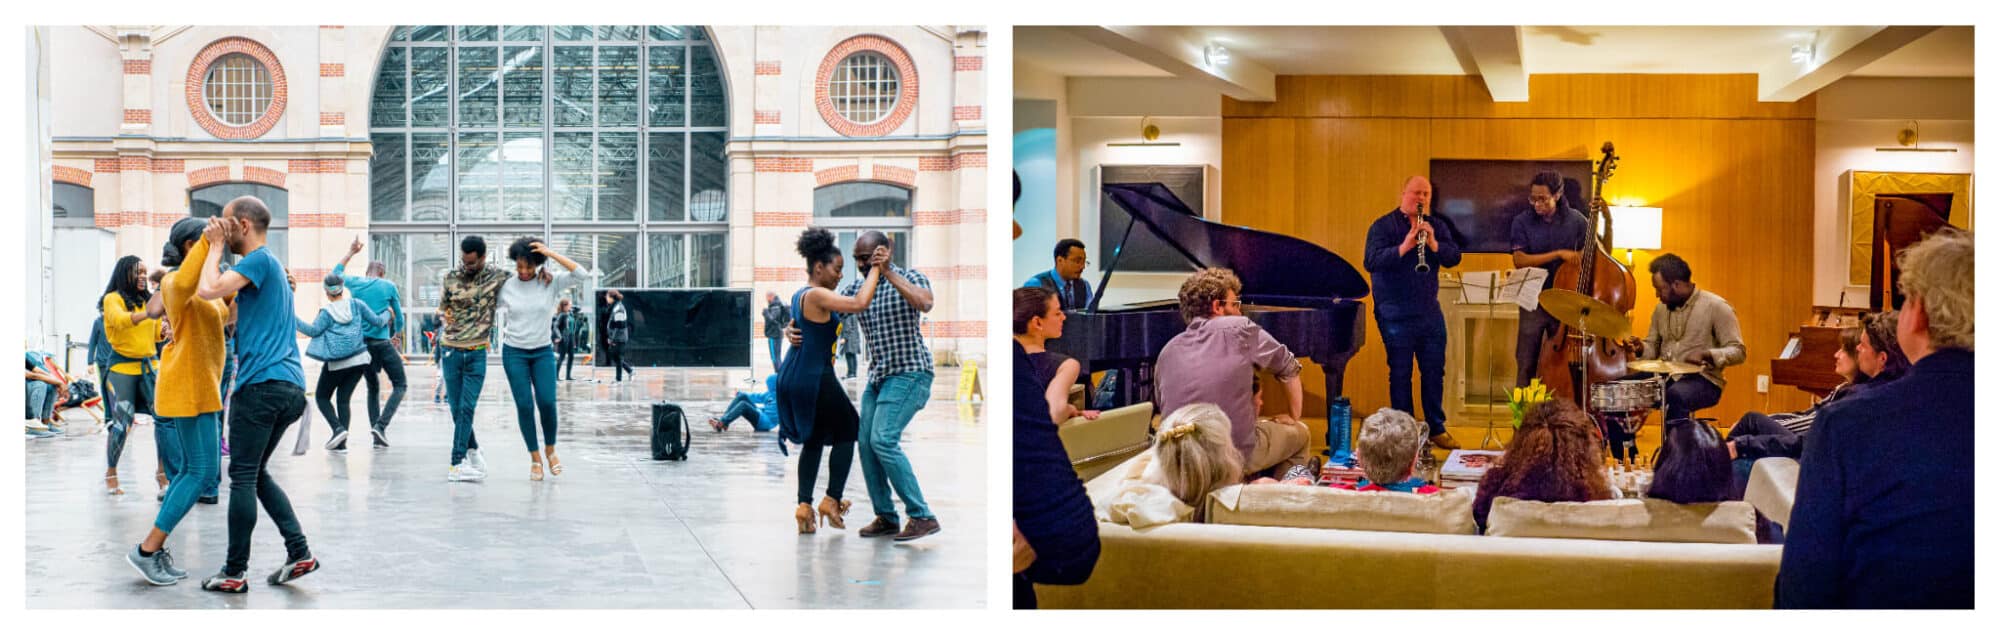 Left: Men and woman dancing in duos in an open court with white tiled flooring. Right: A salon with a band of musicians playing the piano, contrabass, saxophone, and drums.